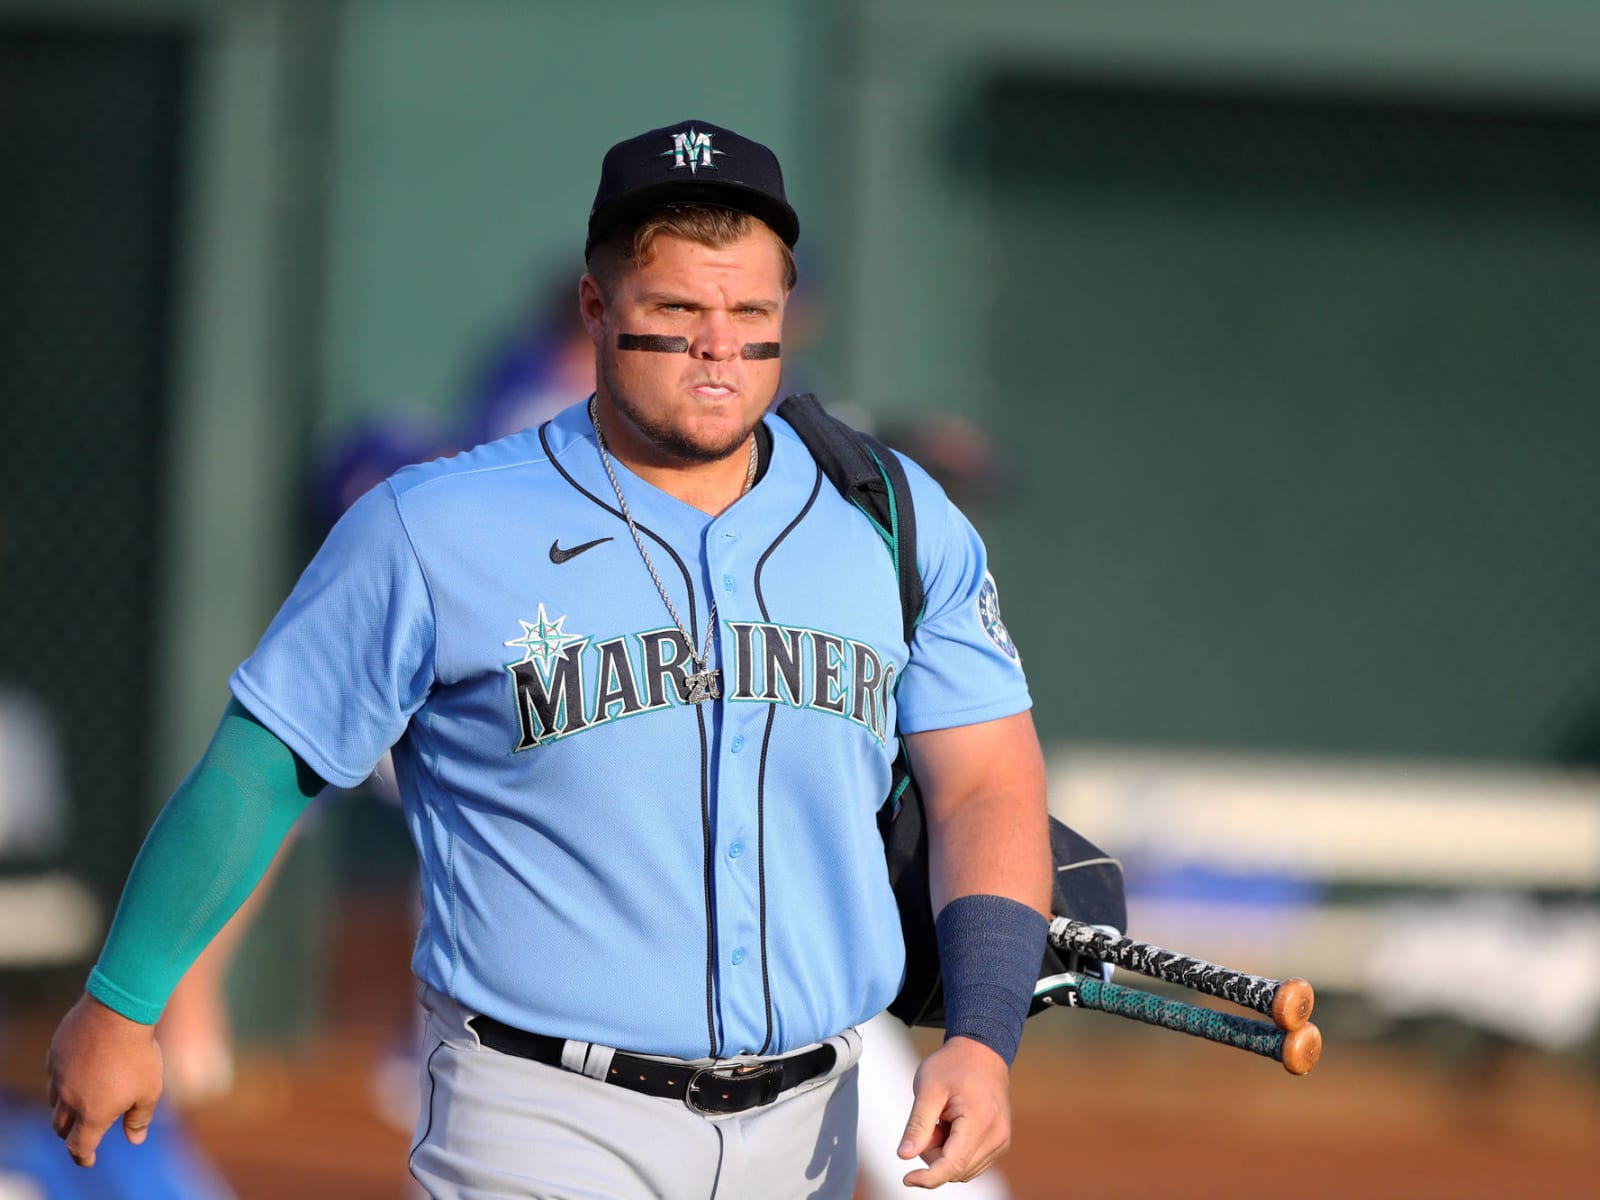 Mariners slugger Daniel Vogelbach shows he's not a '4A' player, he's an  All-Star